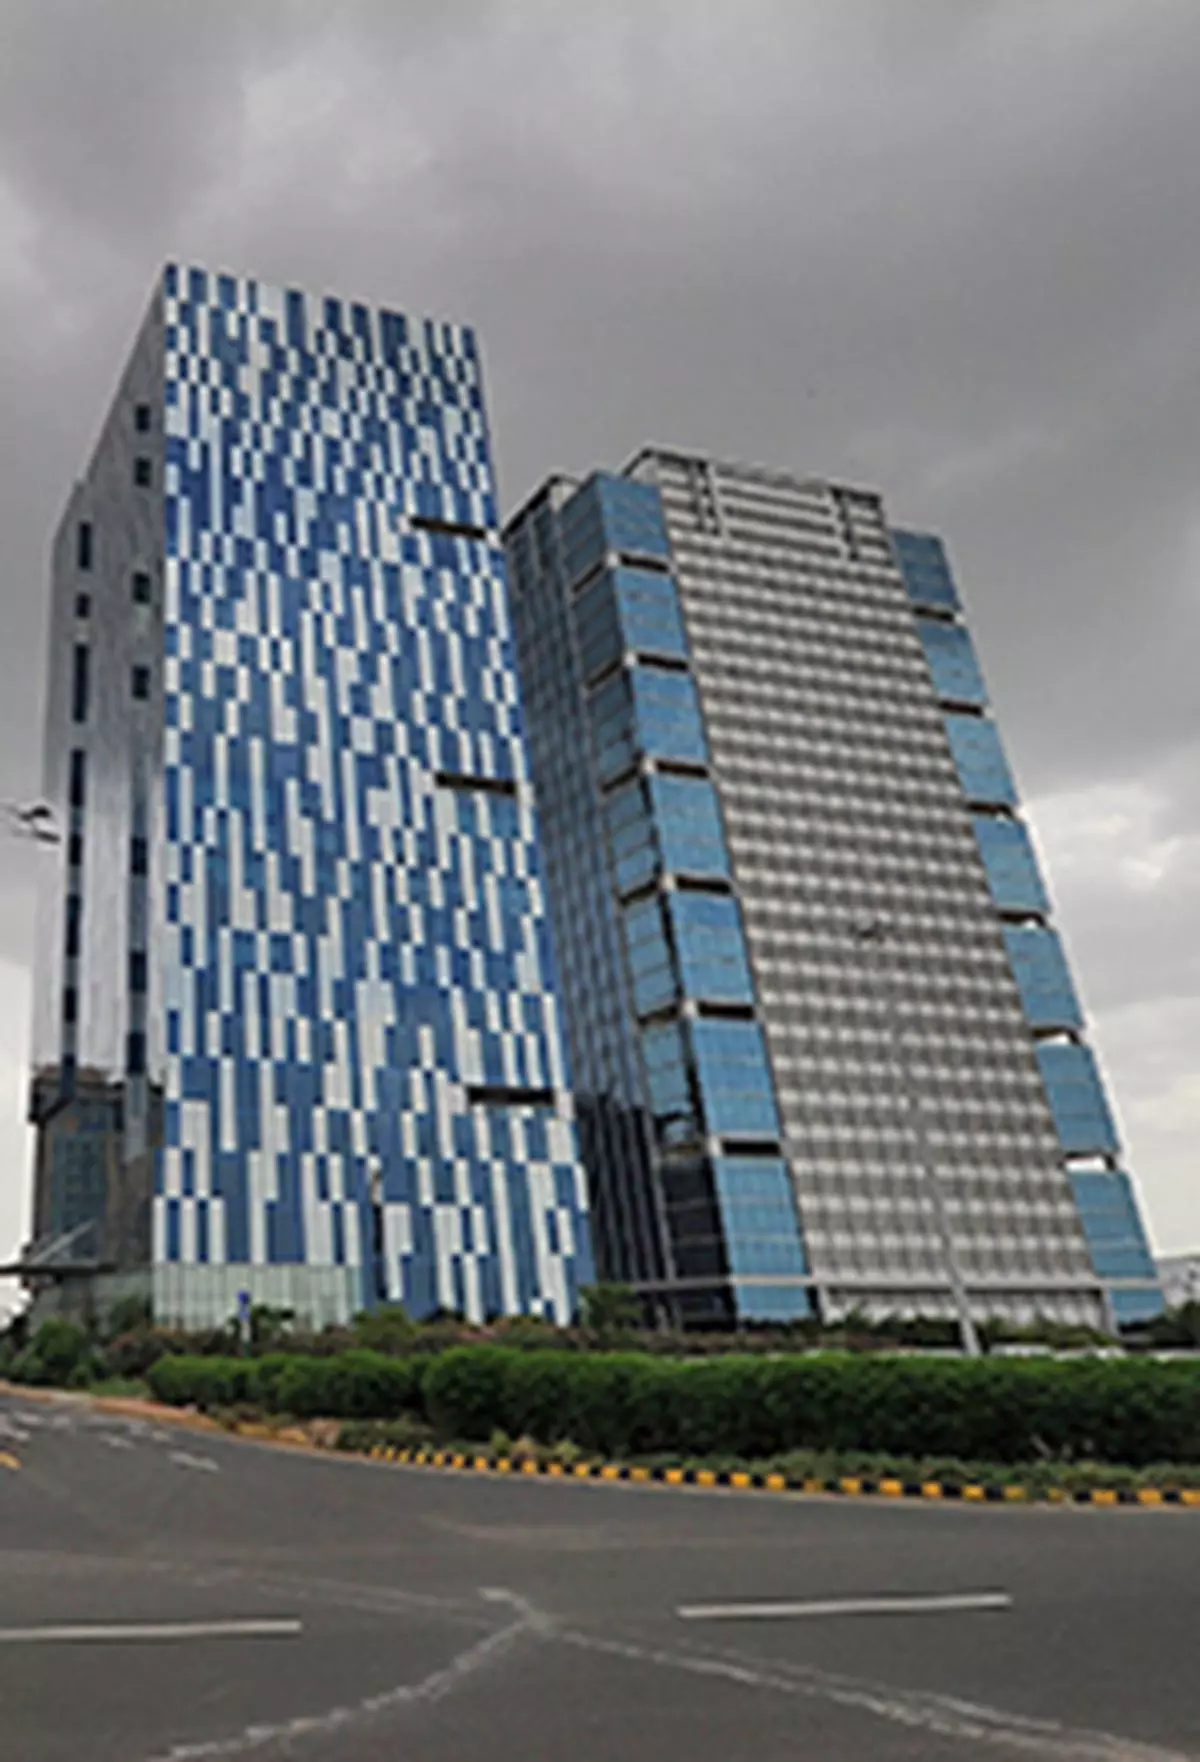 Megaproject: Gujarat International Finance Tec-City (GIFT) -- General  Development News and Discussions | Page 232 | SkyscraperCity Forum